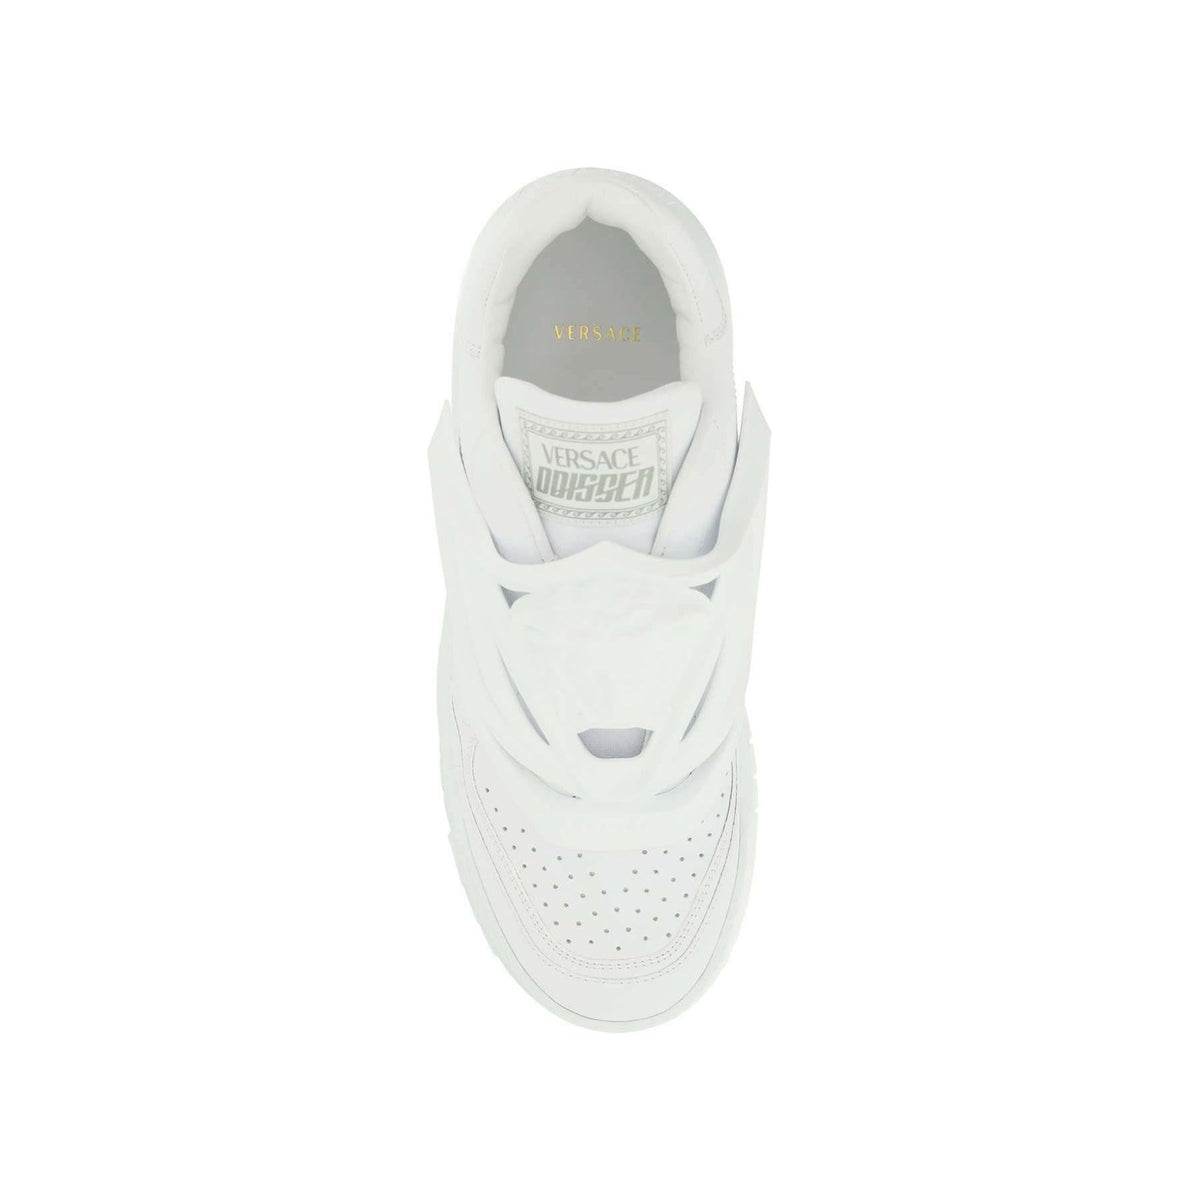 White Leather Odissea Slip-On Sneakers With Perforated Toe Caps VERSACE JOHN JULIA.